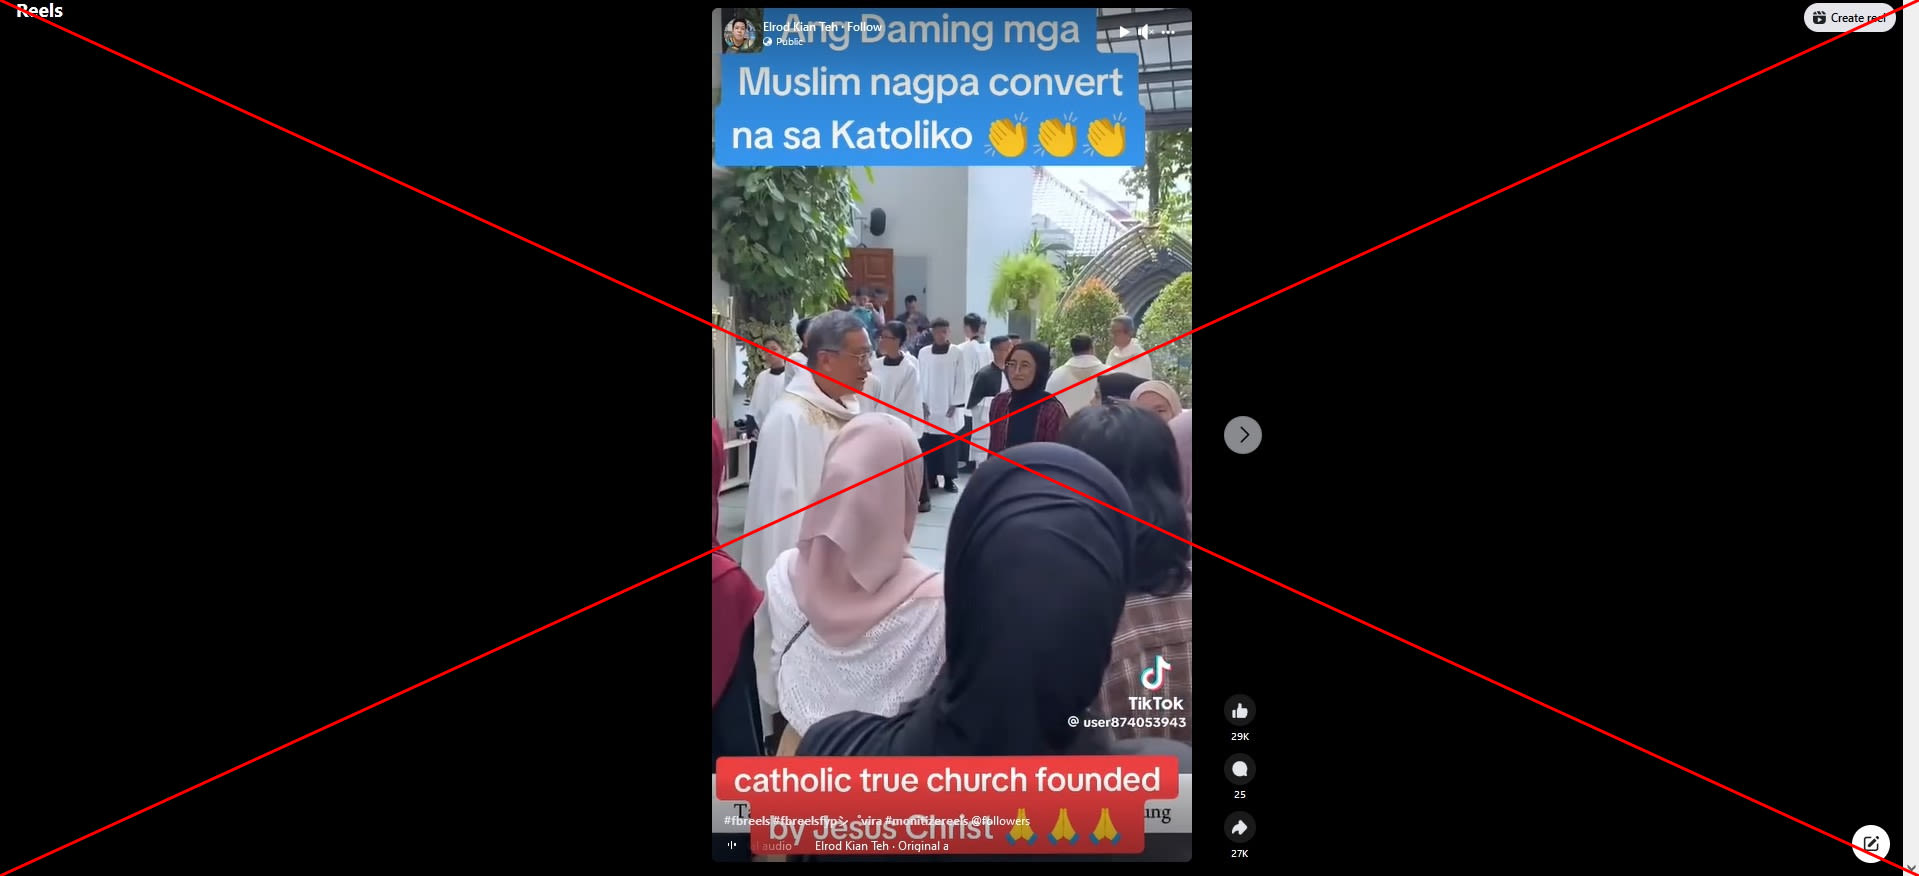 Video of Muslims visiting Indonesia church misrepresented as 'religious conversion'